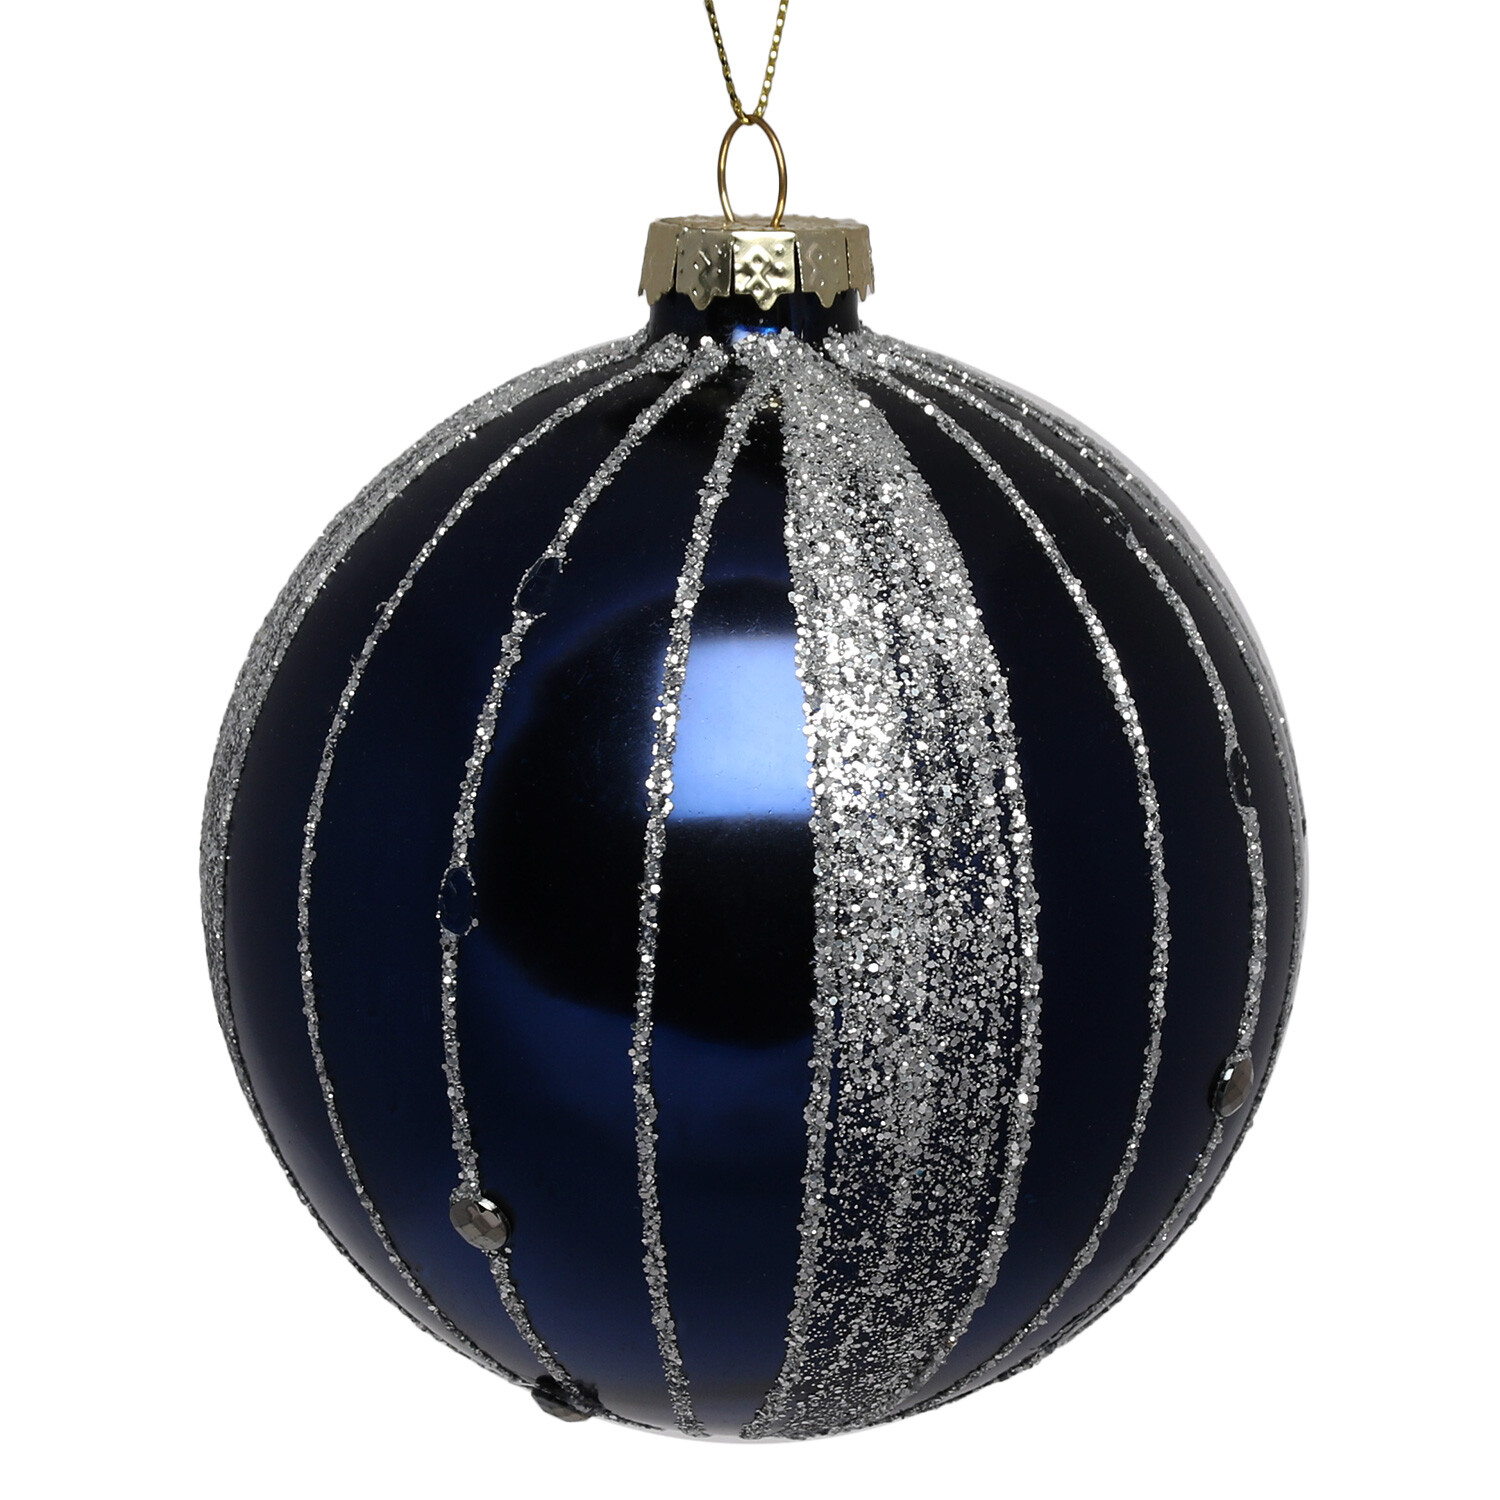 Midnight Fantasy Navy and Silver Glitter Stripe Bauble Single Ornament Image